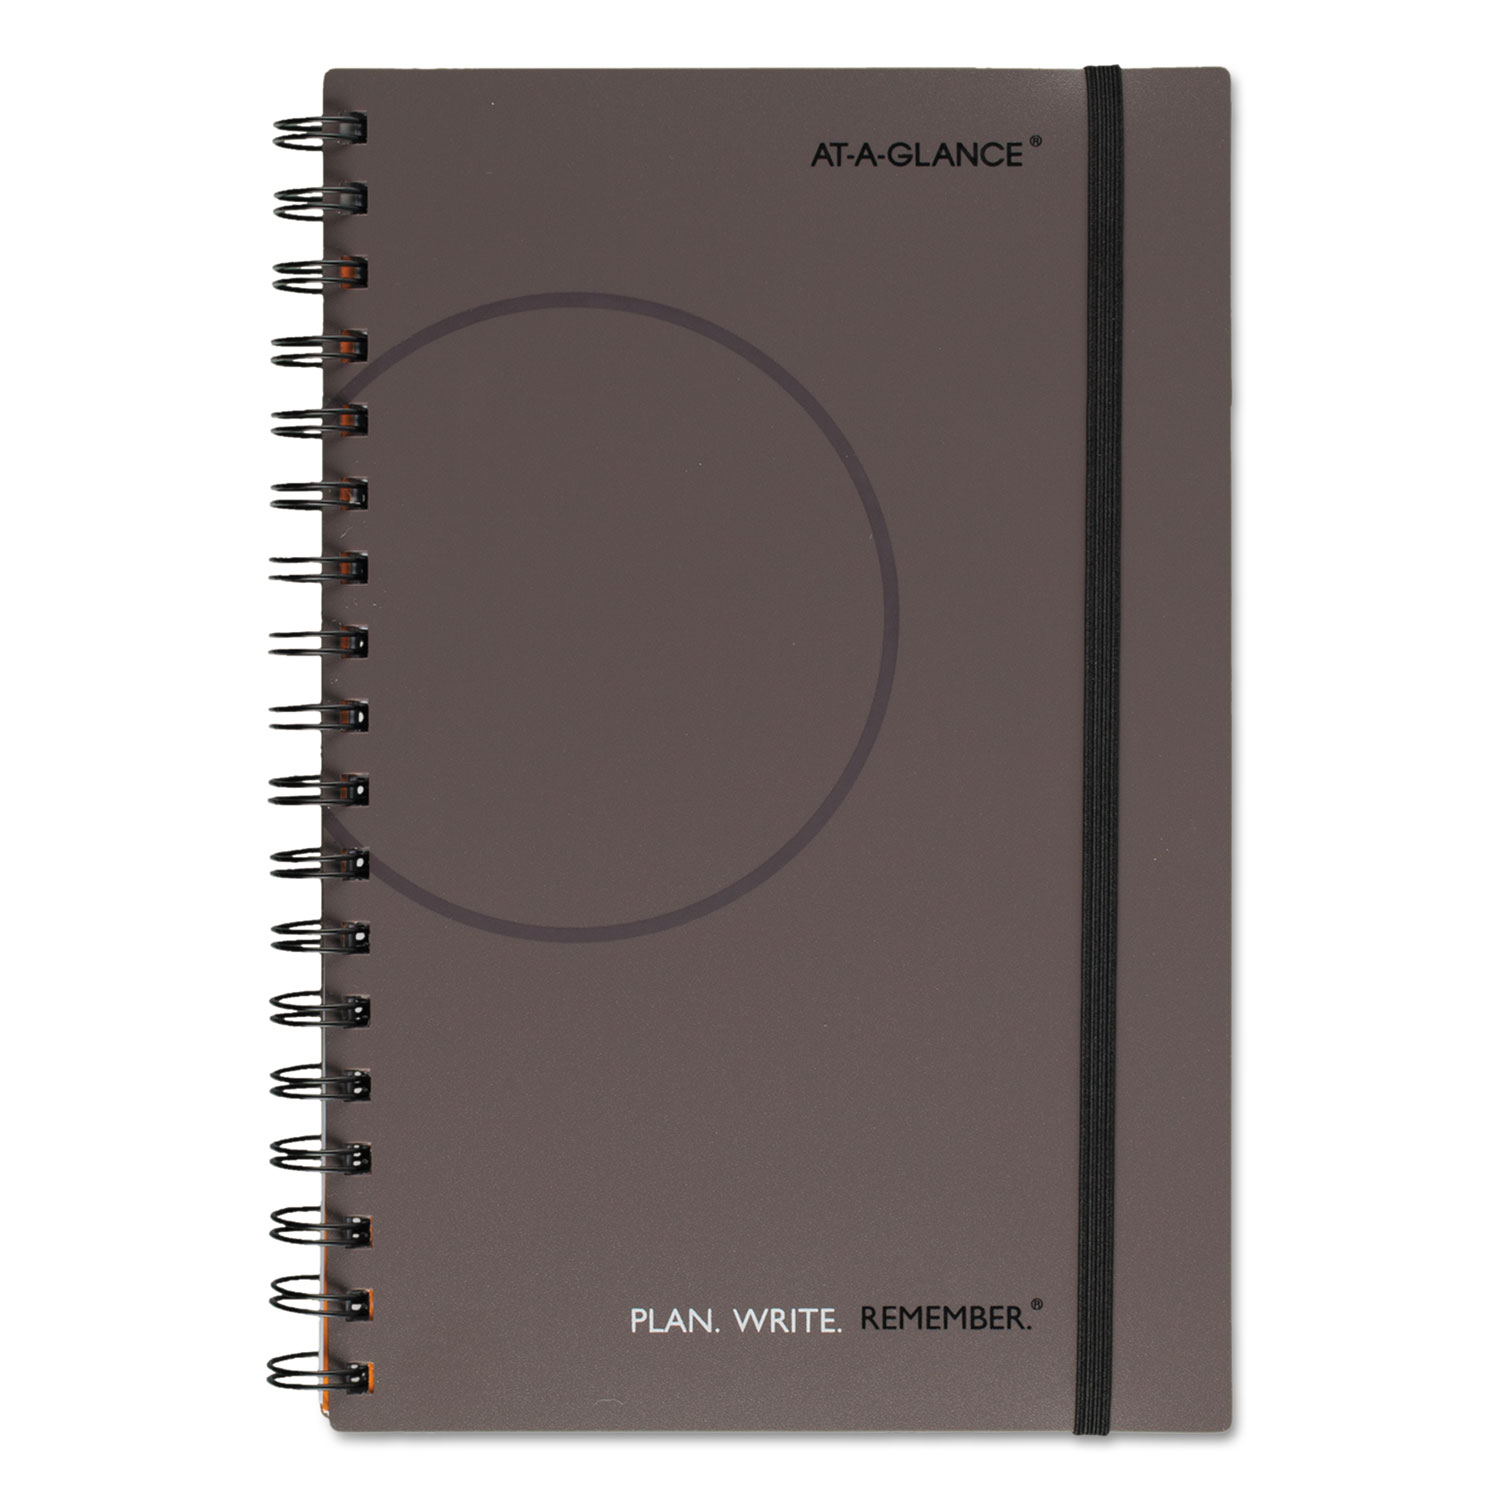 Plan. Write. Remember. Planning Notebook Two Days Per Page, 9 x 6, Gray